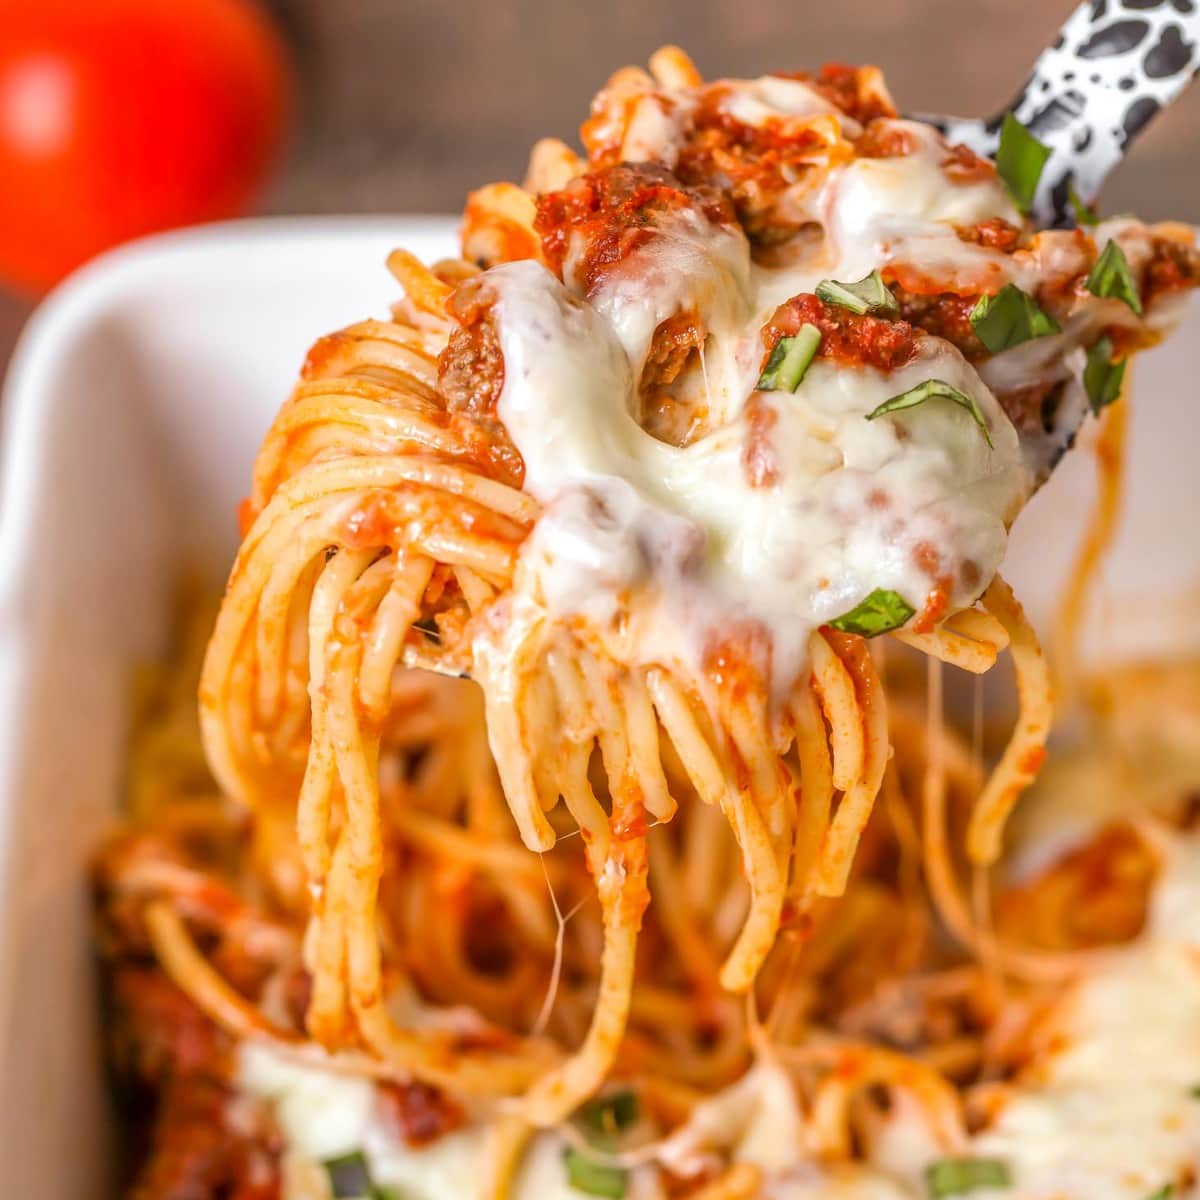 Baked spaghetti being scooped out of a dish with a serving spoon